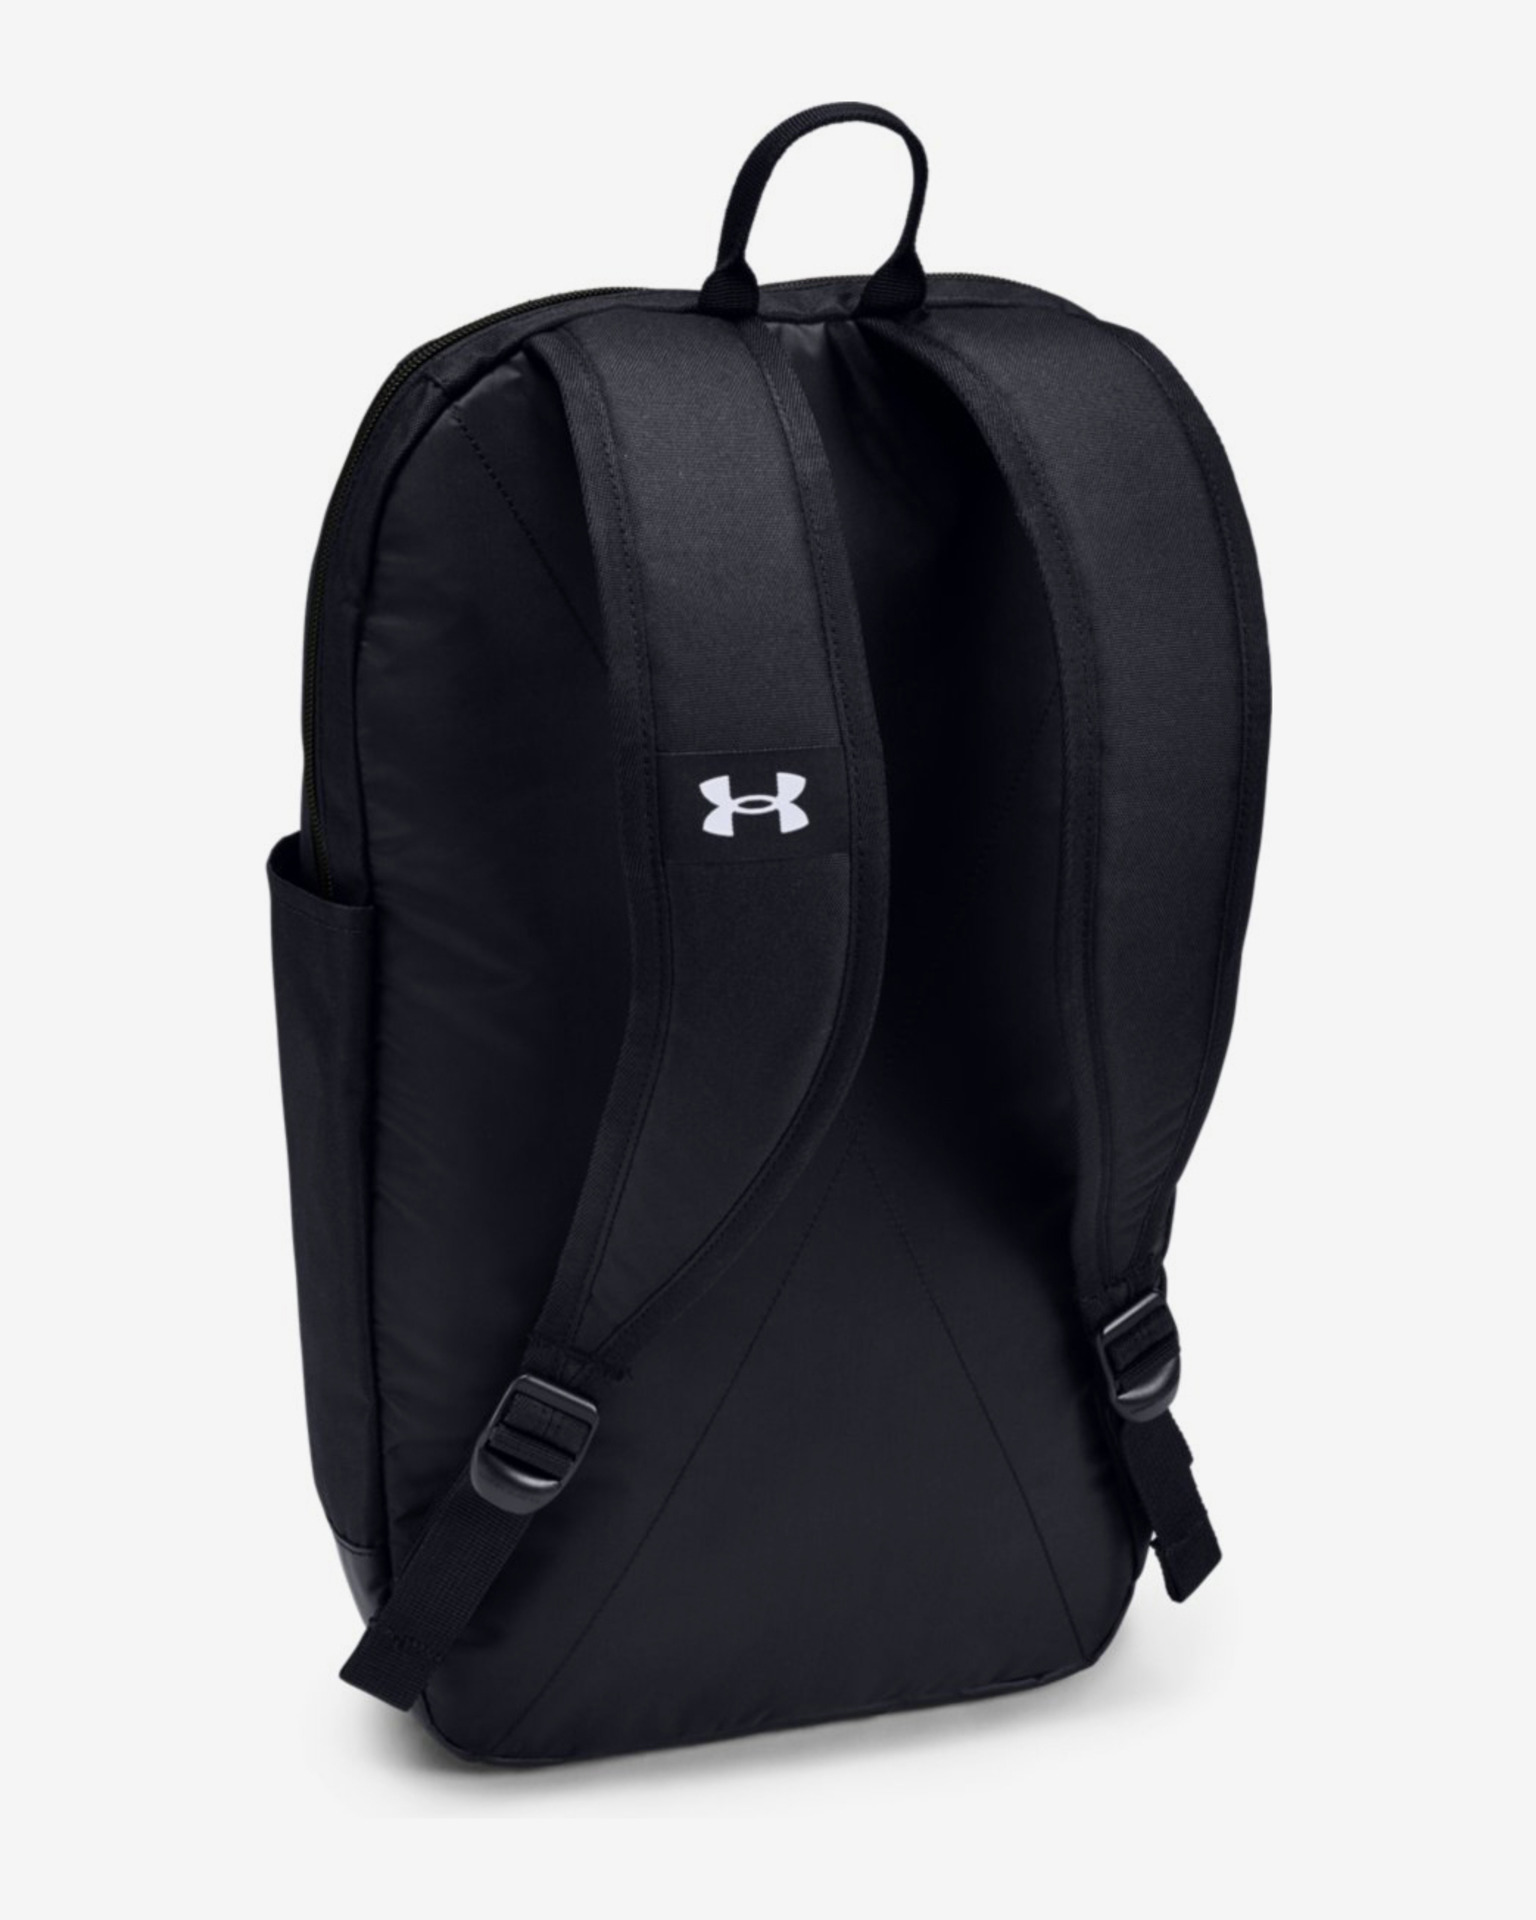 Grey Sports Outdoors Gym Lightweight Under Armour Unisex Patterson Backpack 